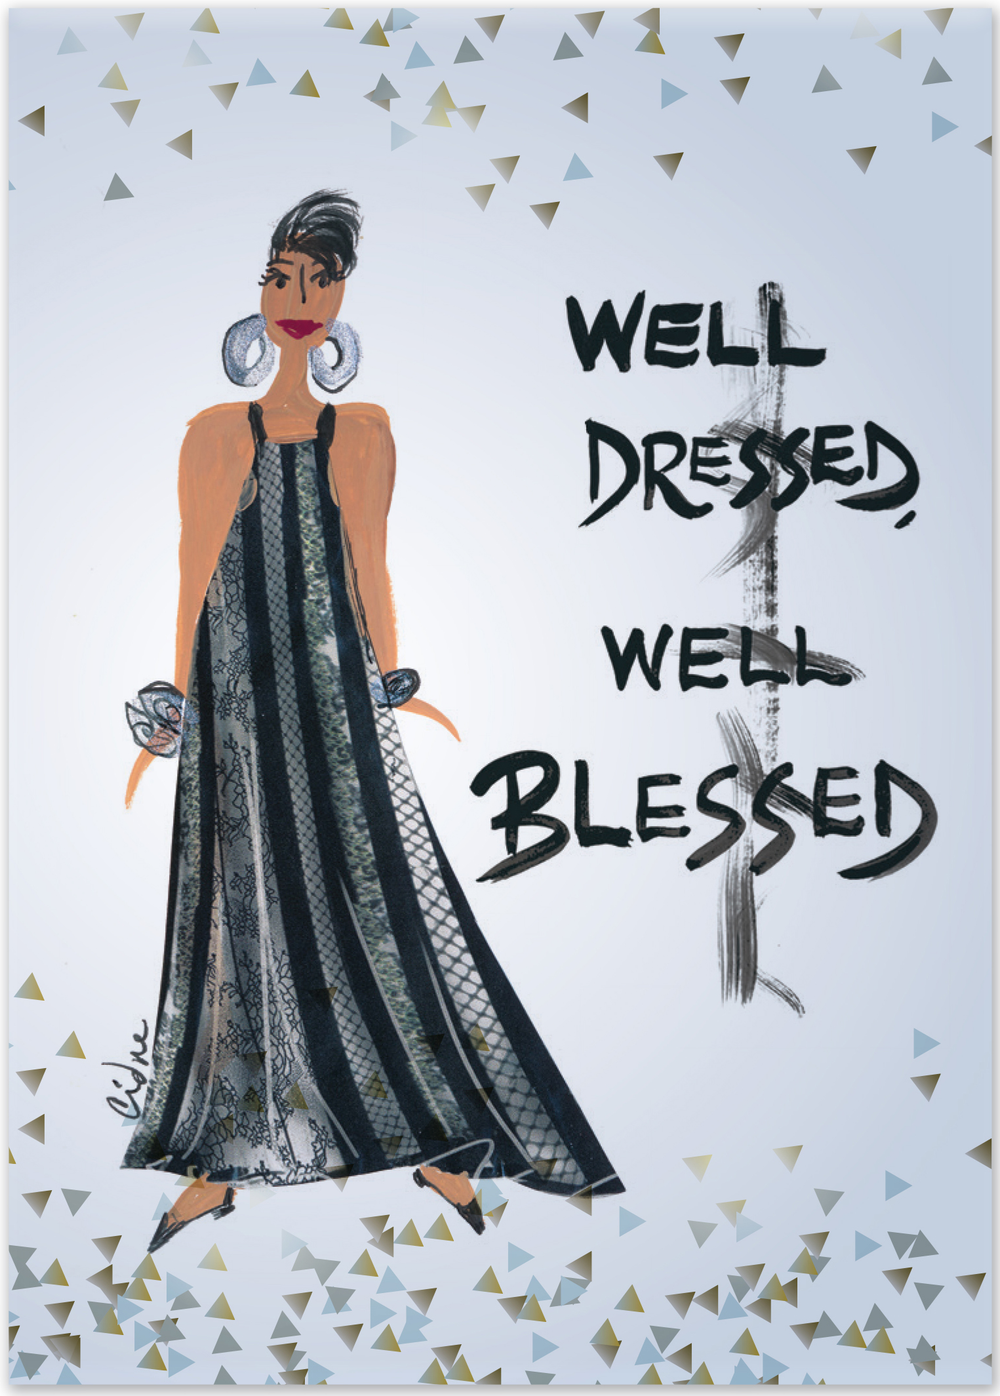 Well Dressed Well Blessed: African American Magnet by Cidne Wallce